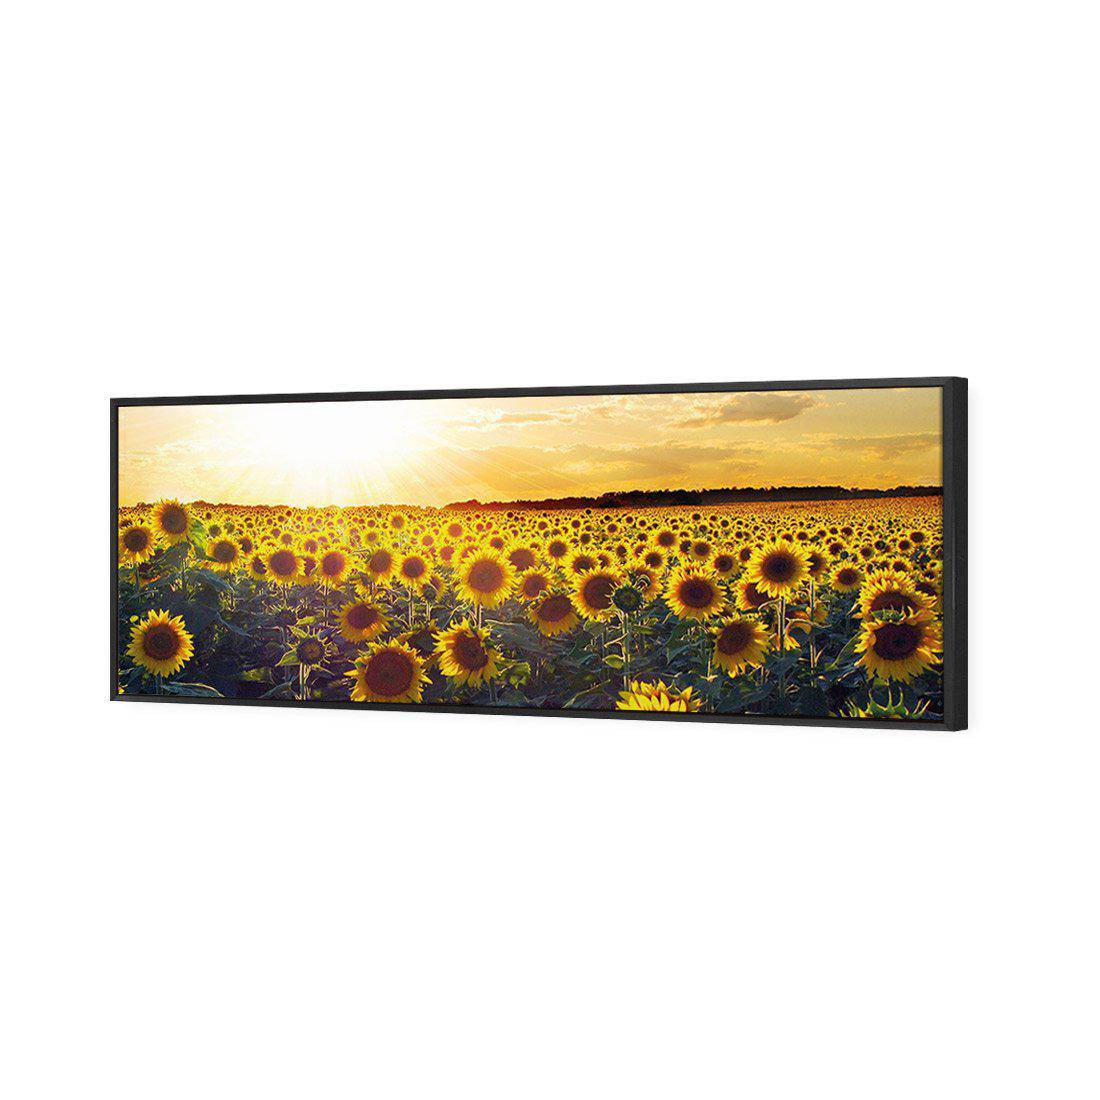 Sunflowers At Sunset Canvas Art-Canvas-Wall Art Designs-60x20cm-Canvas - Black Frame-Wall Art Designs